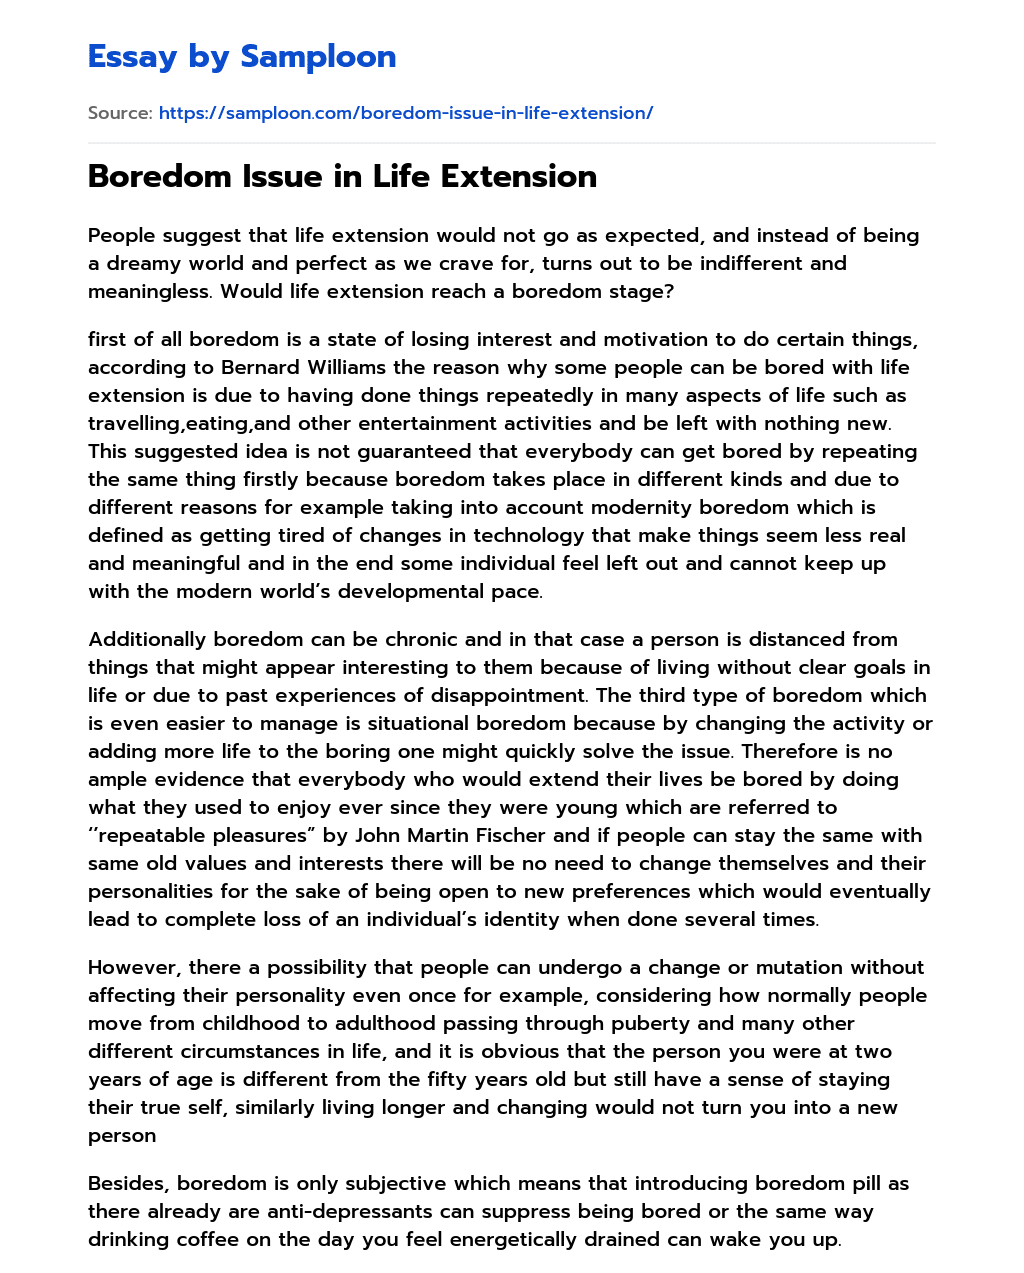 Boredom Issue in Life Extension essay